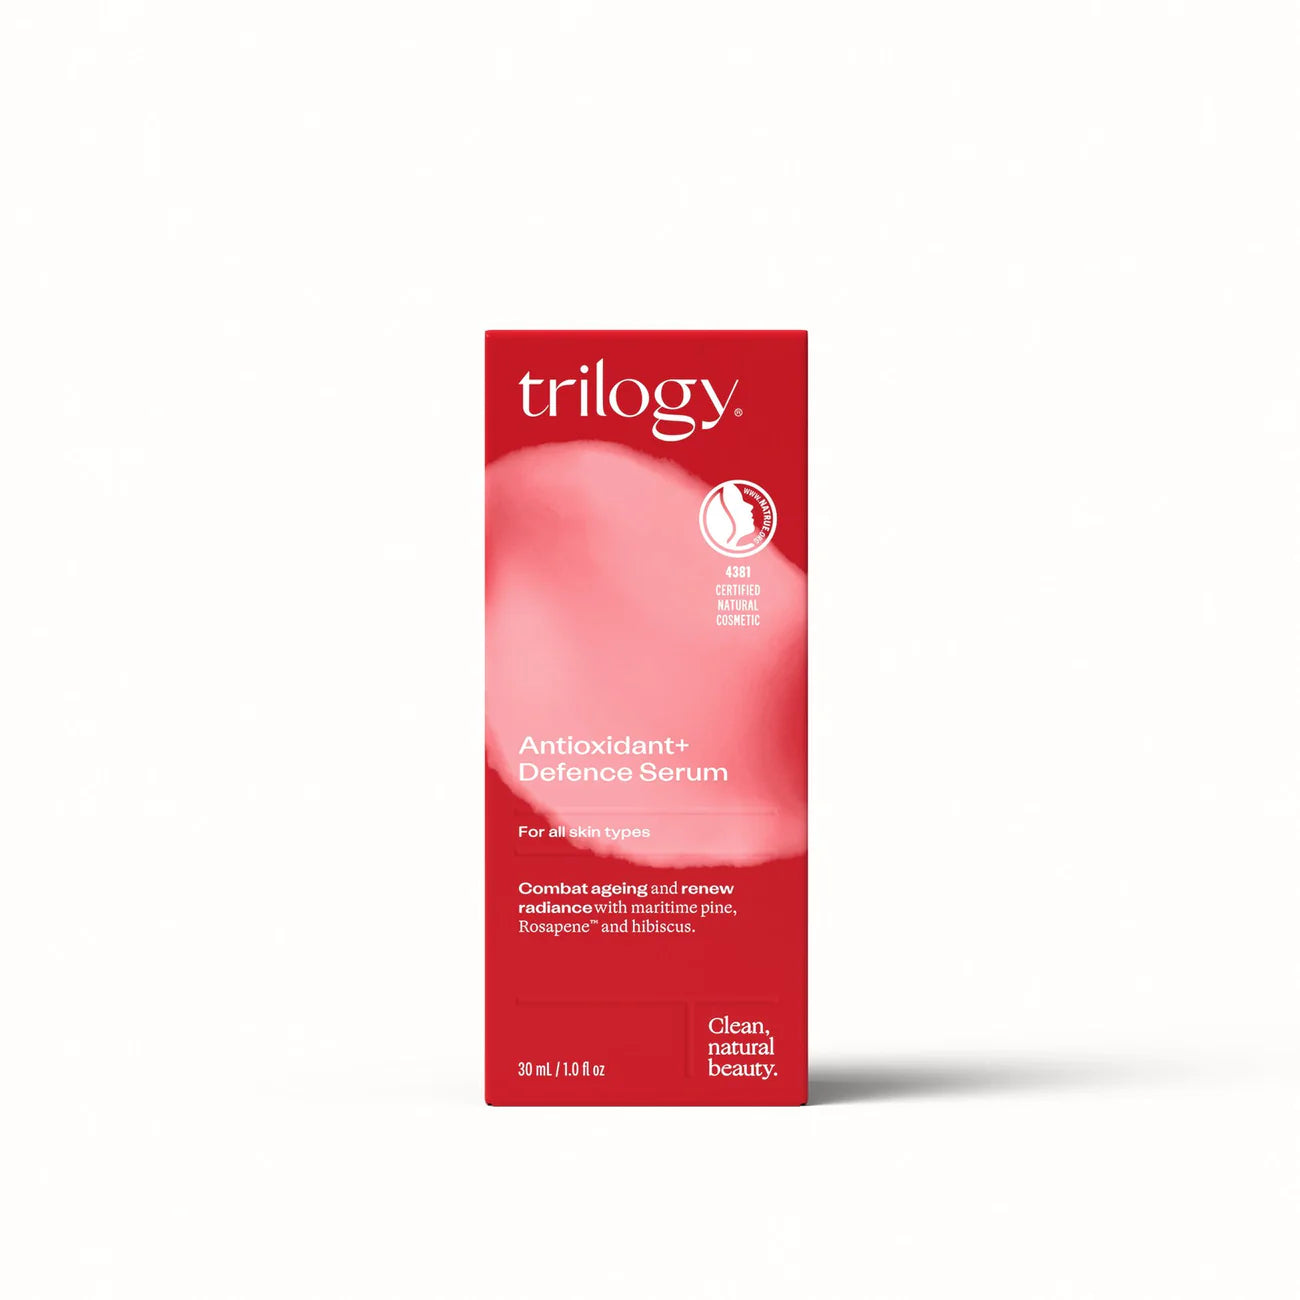 Trilogy Antioxidant+ Defence Serum 30ml to Radiant and Improved Complexion